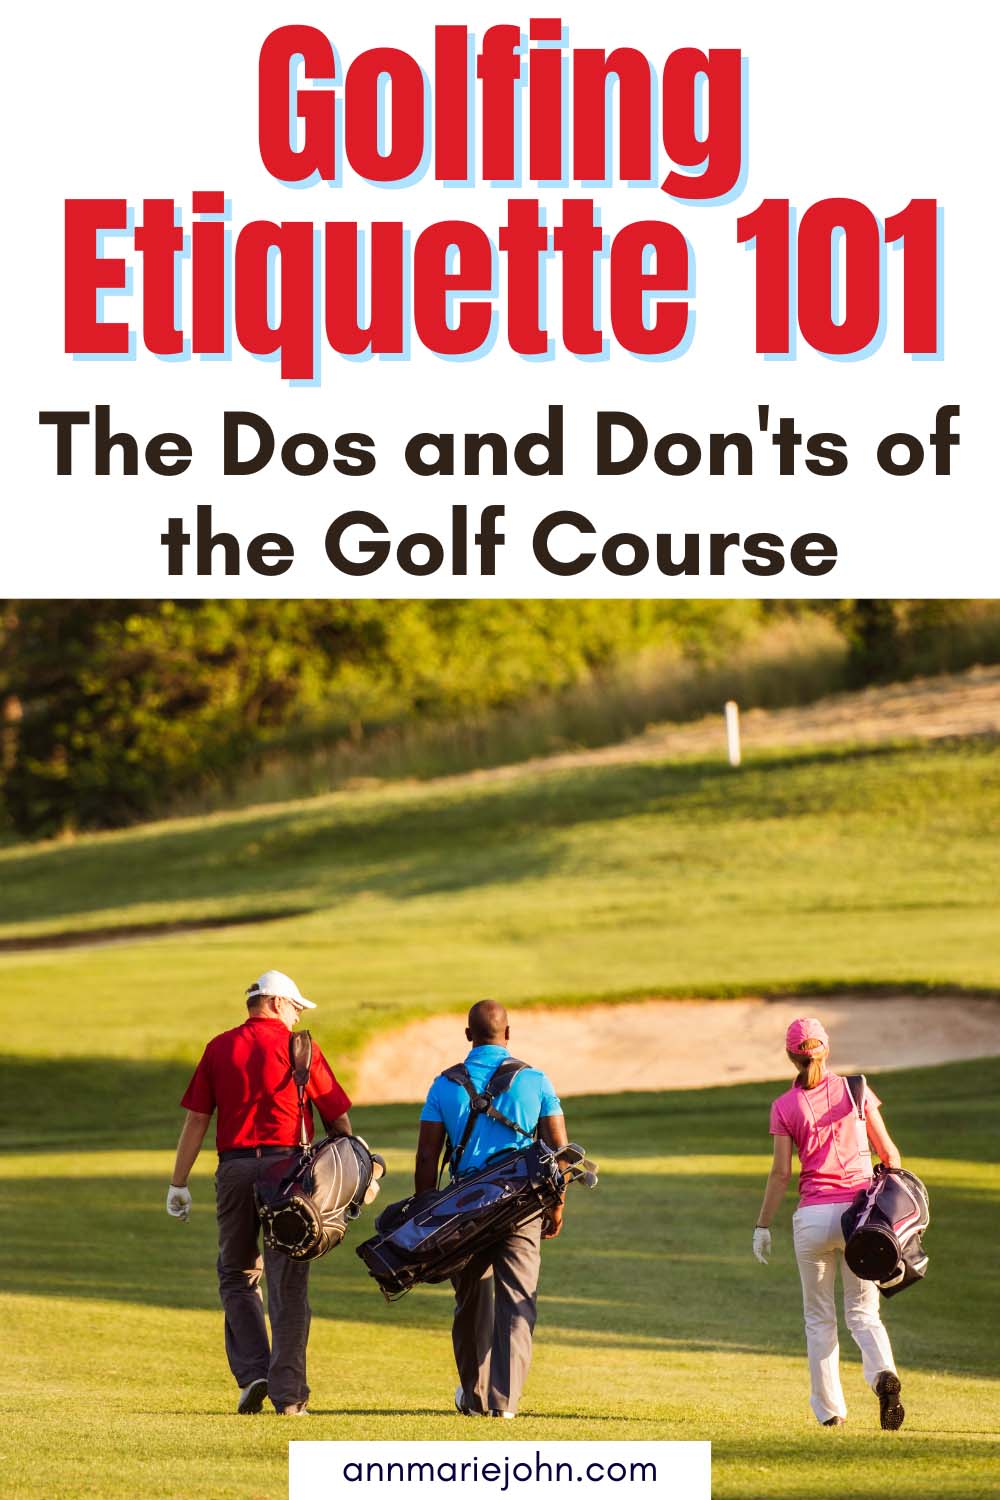 Golfing Etiquette 101: The Dos and Don'ts of the Golf Course